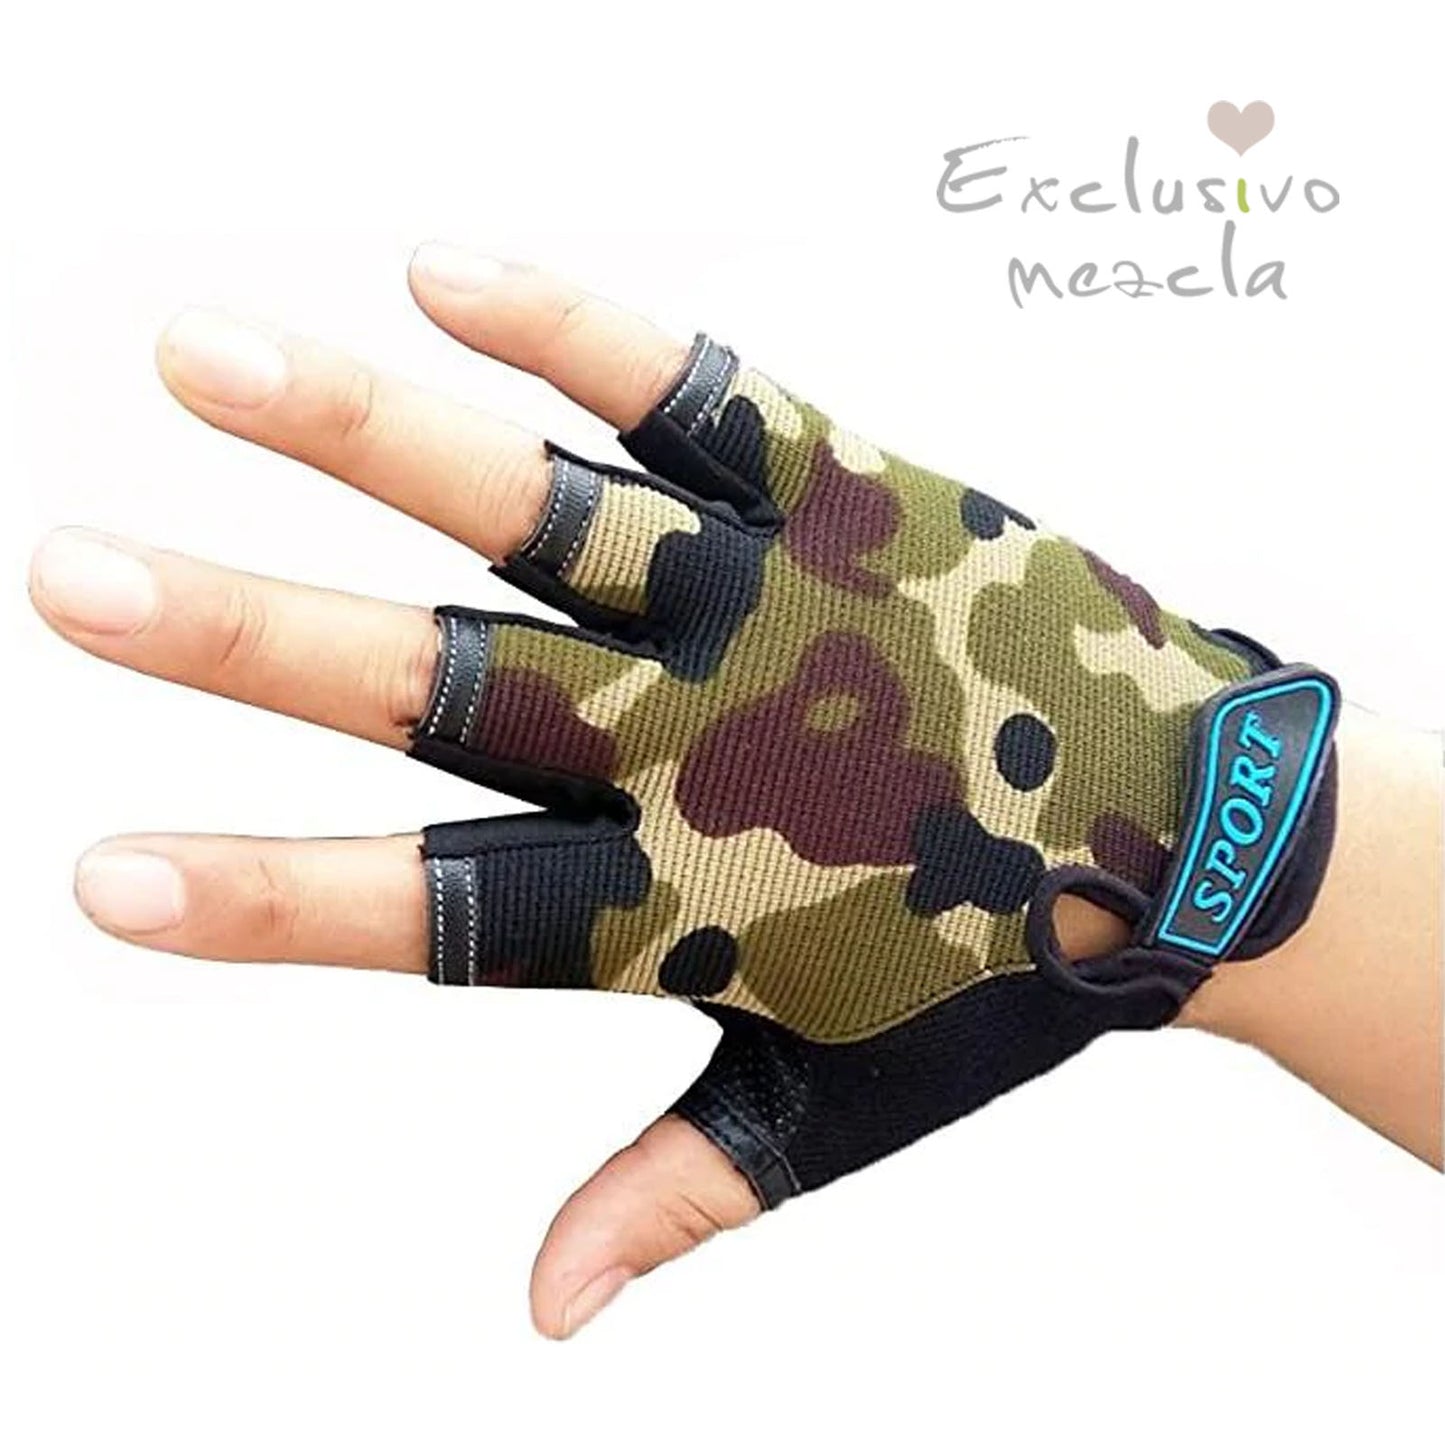 Exclusivo Mezcla Kids Fingerless Camo Gloves Cycling Bike Sports Gloves for Boys Children Anti-Slip Breathable Camouflage Mittens